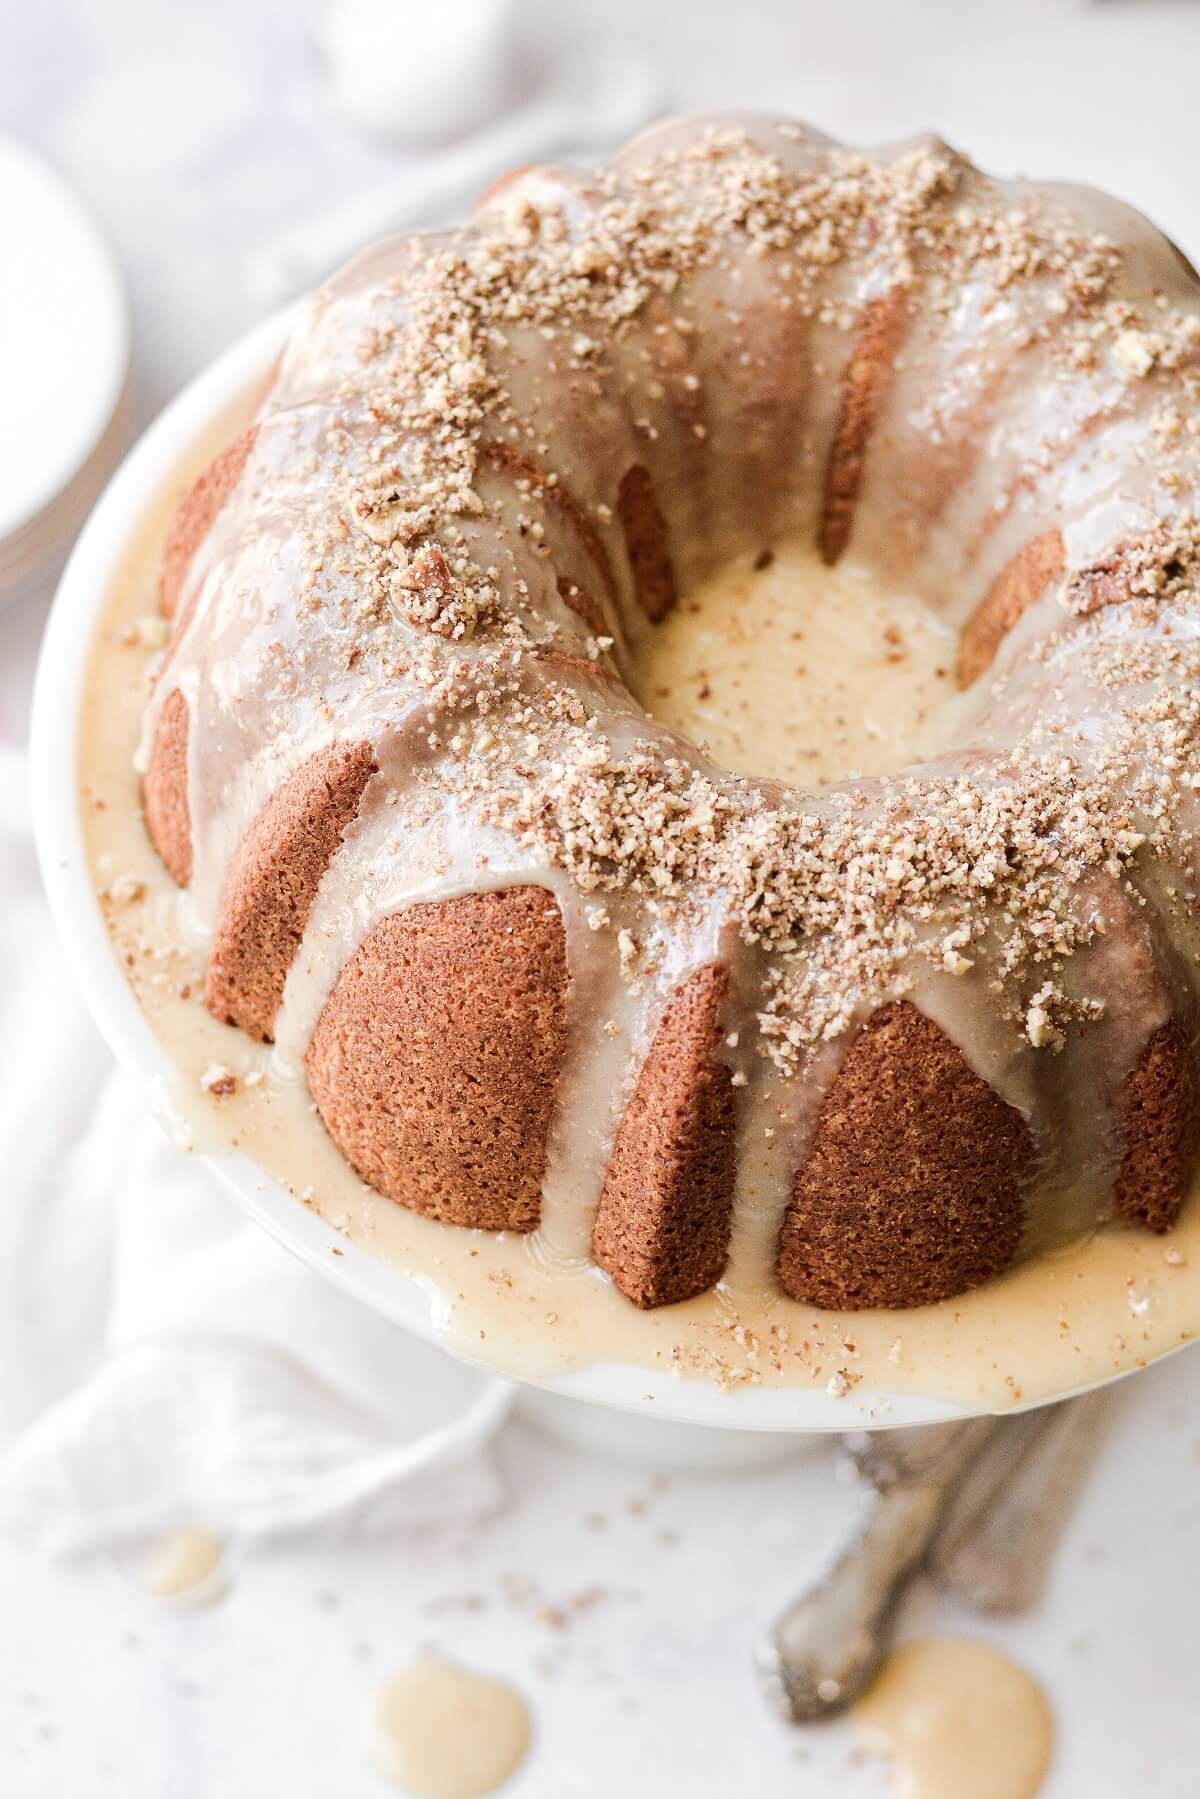 Butter pecan pound cake, with bourbon icing and chopped pecans.